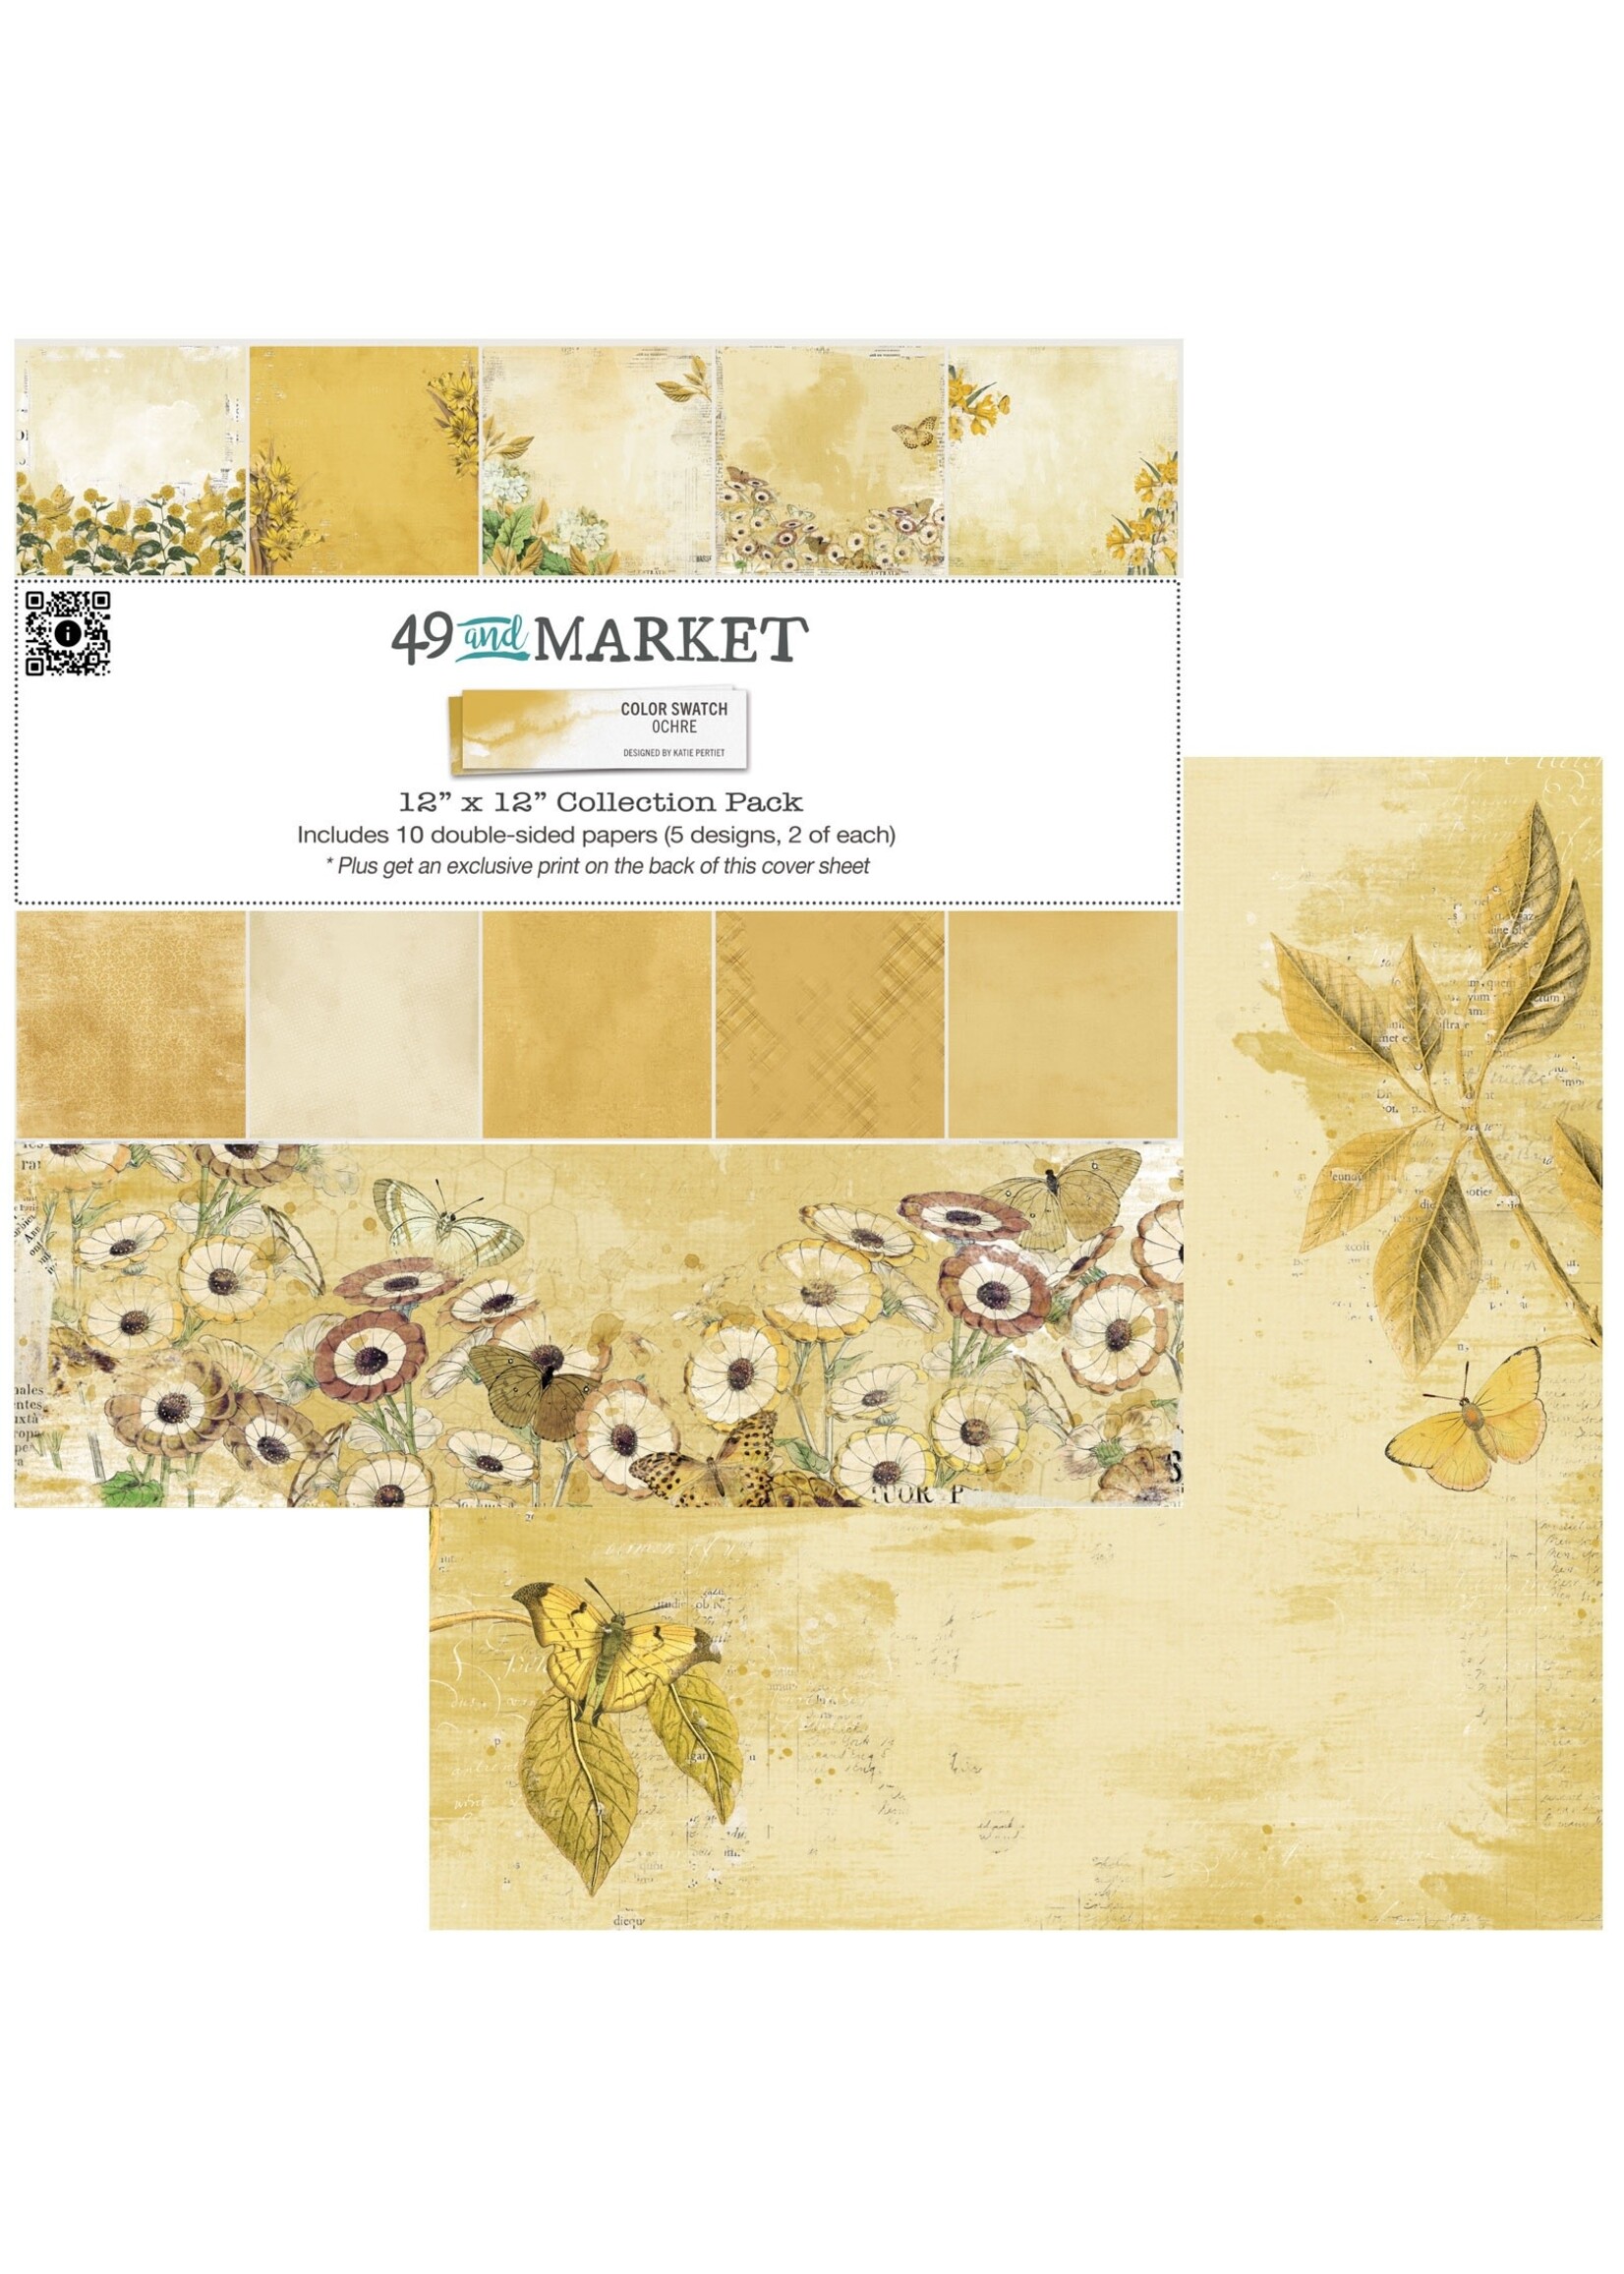 49 and Market 49 And Market Collection Pack 12"X12"-Color Swatch: Ochre